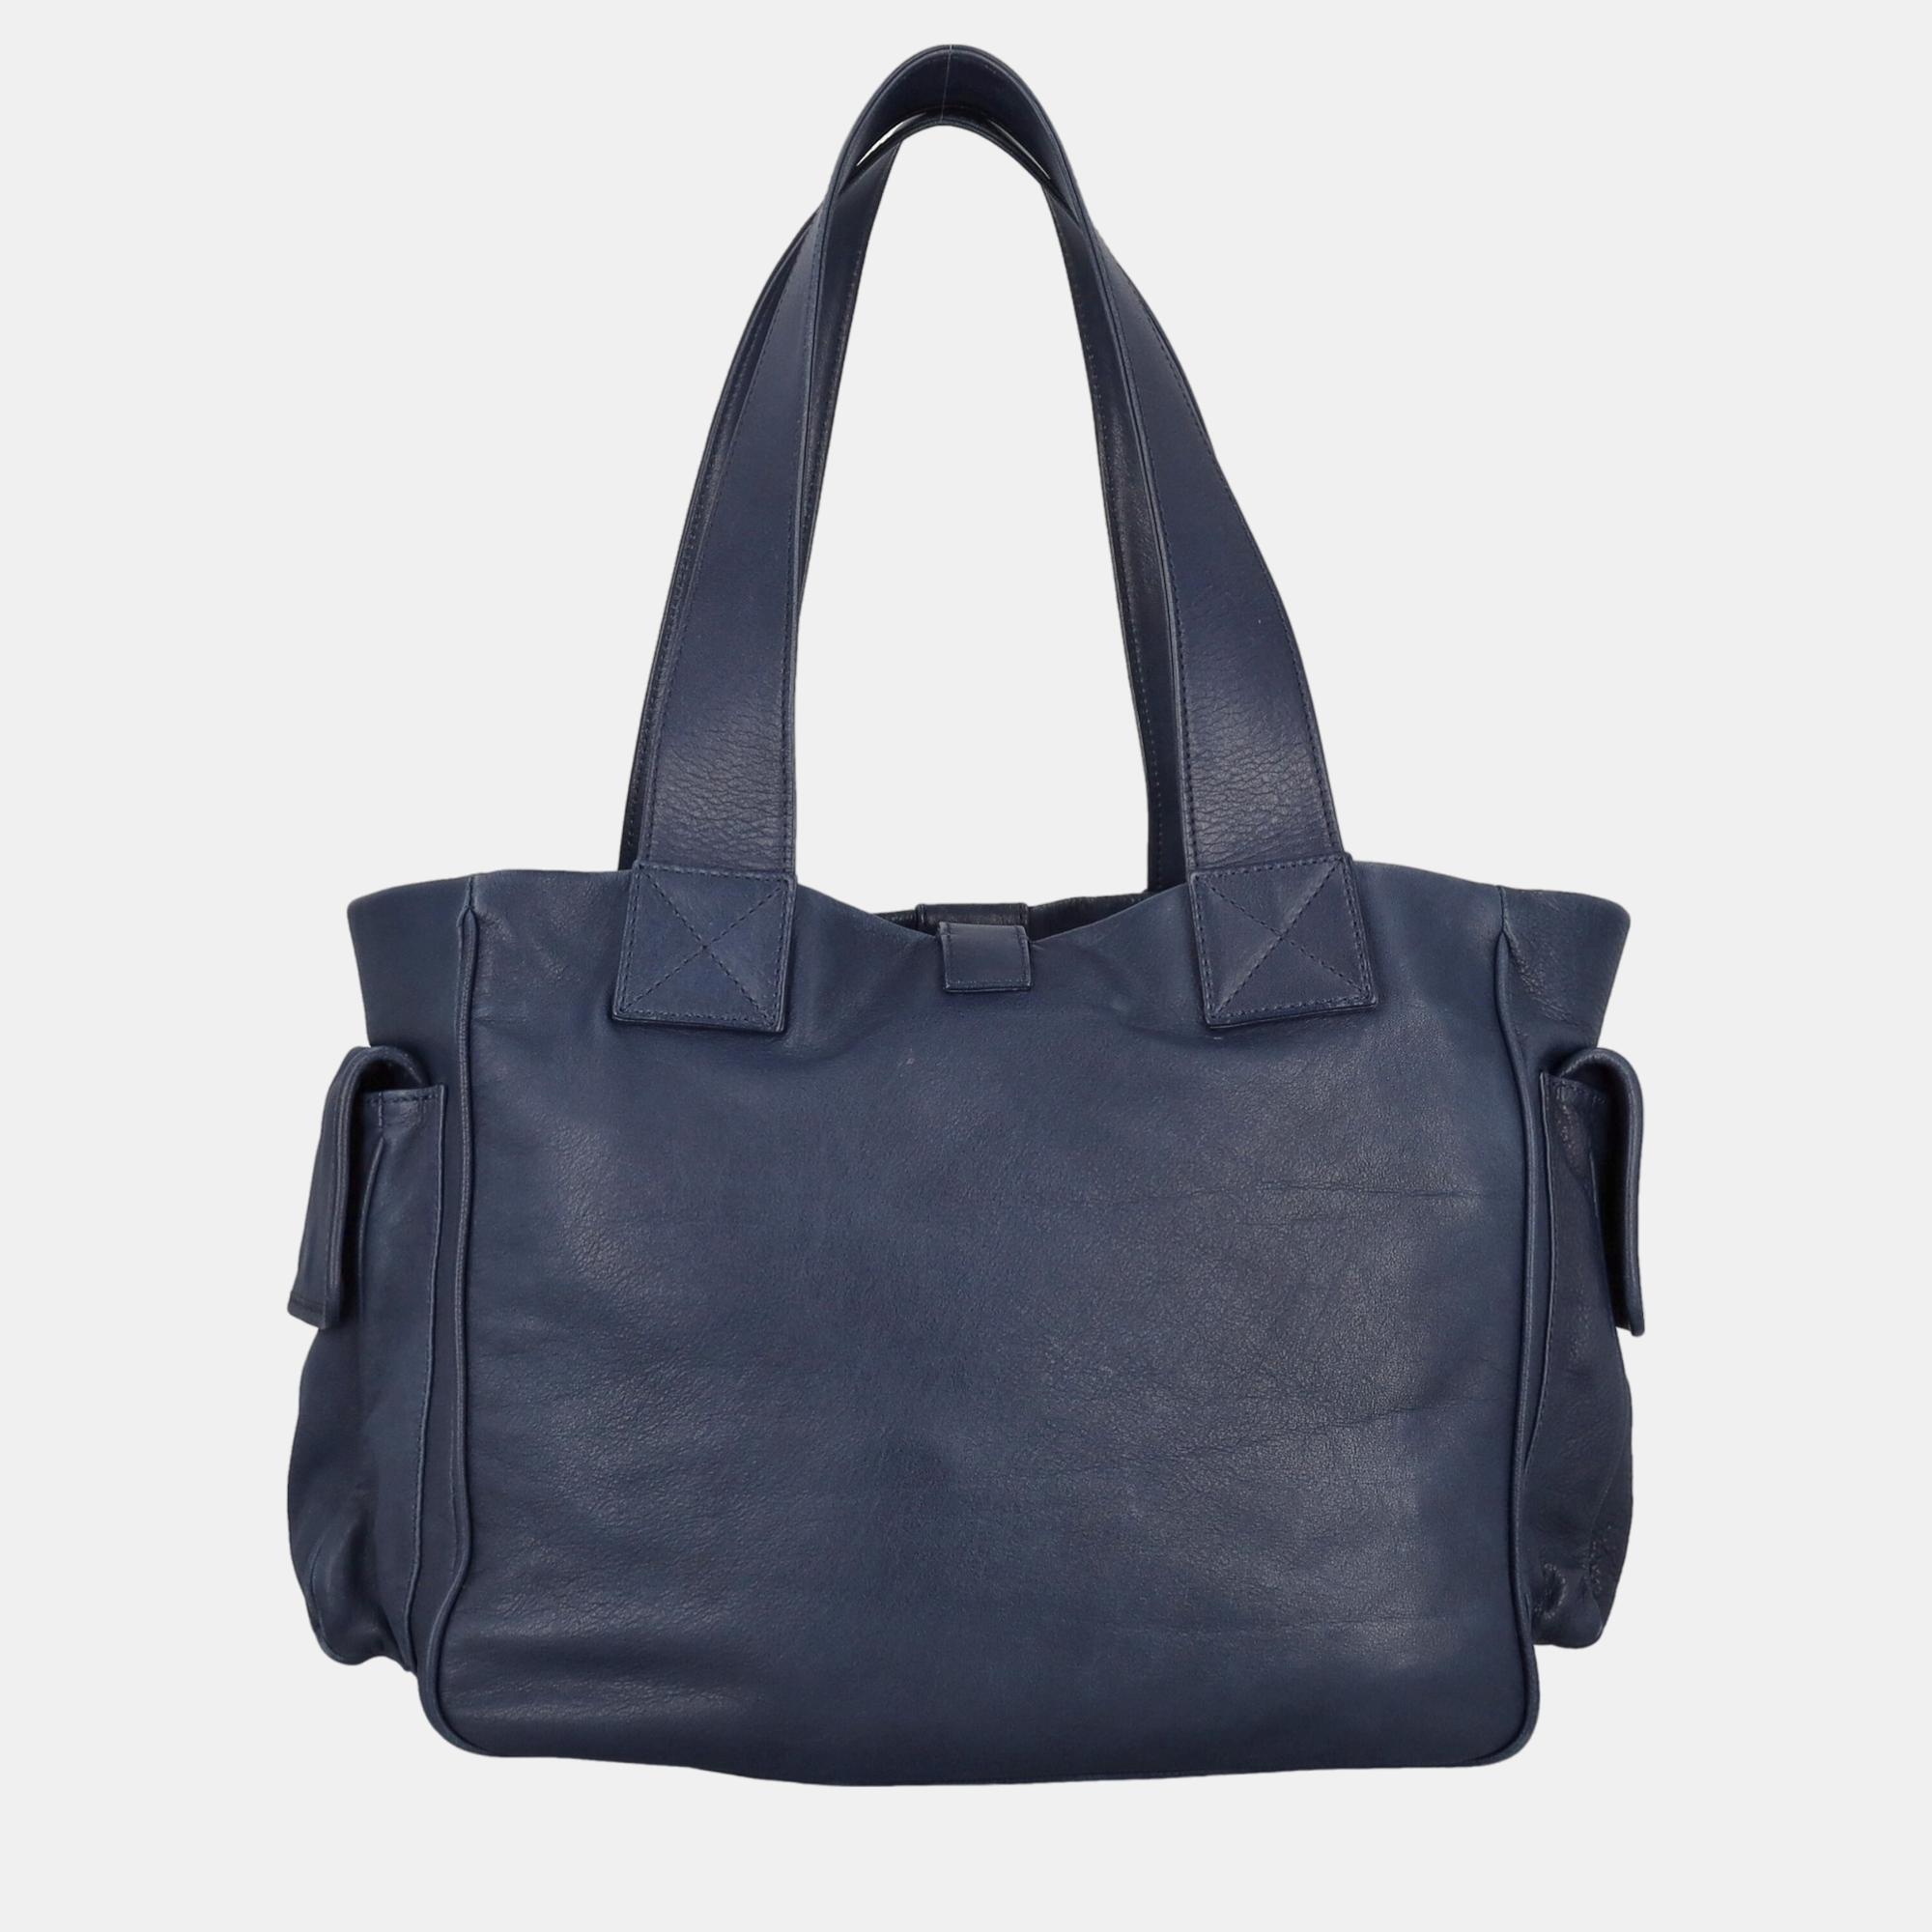 Fendi  Women's Leather Tote Bag - Navy - One Size